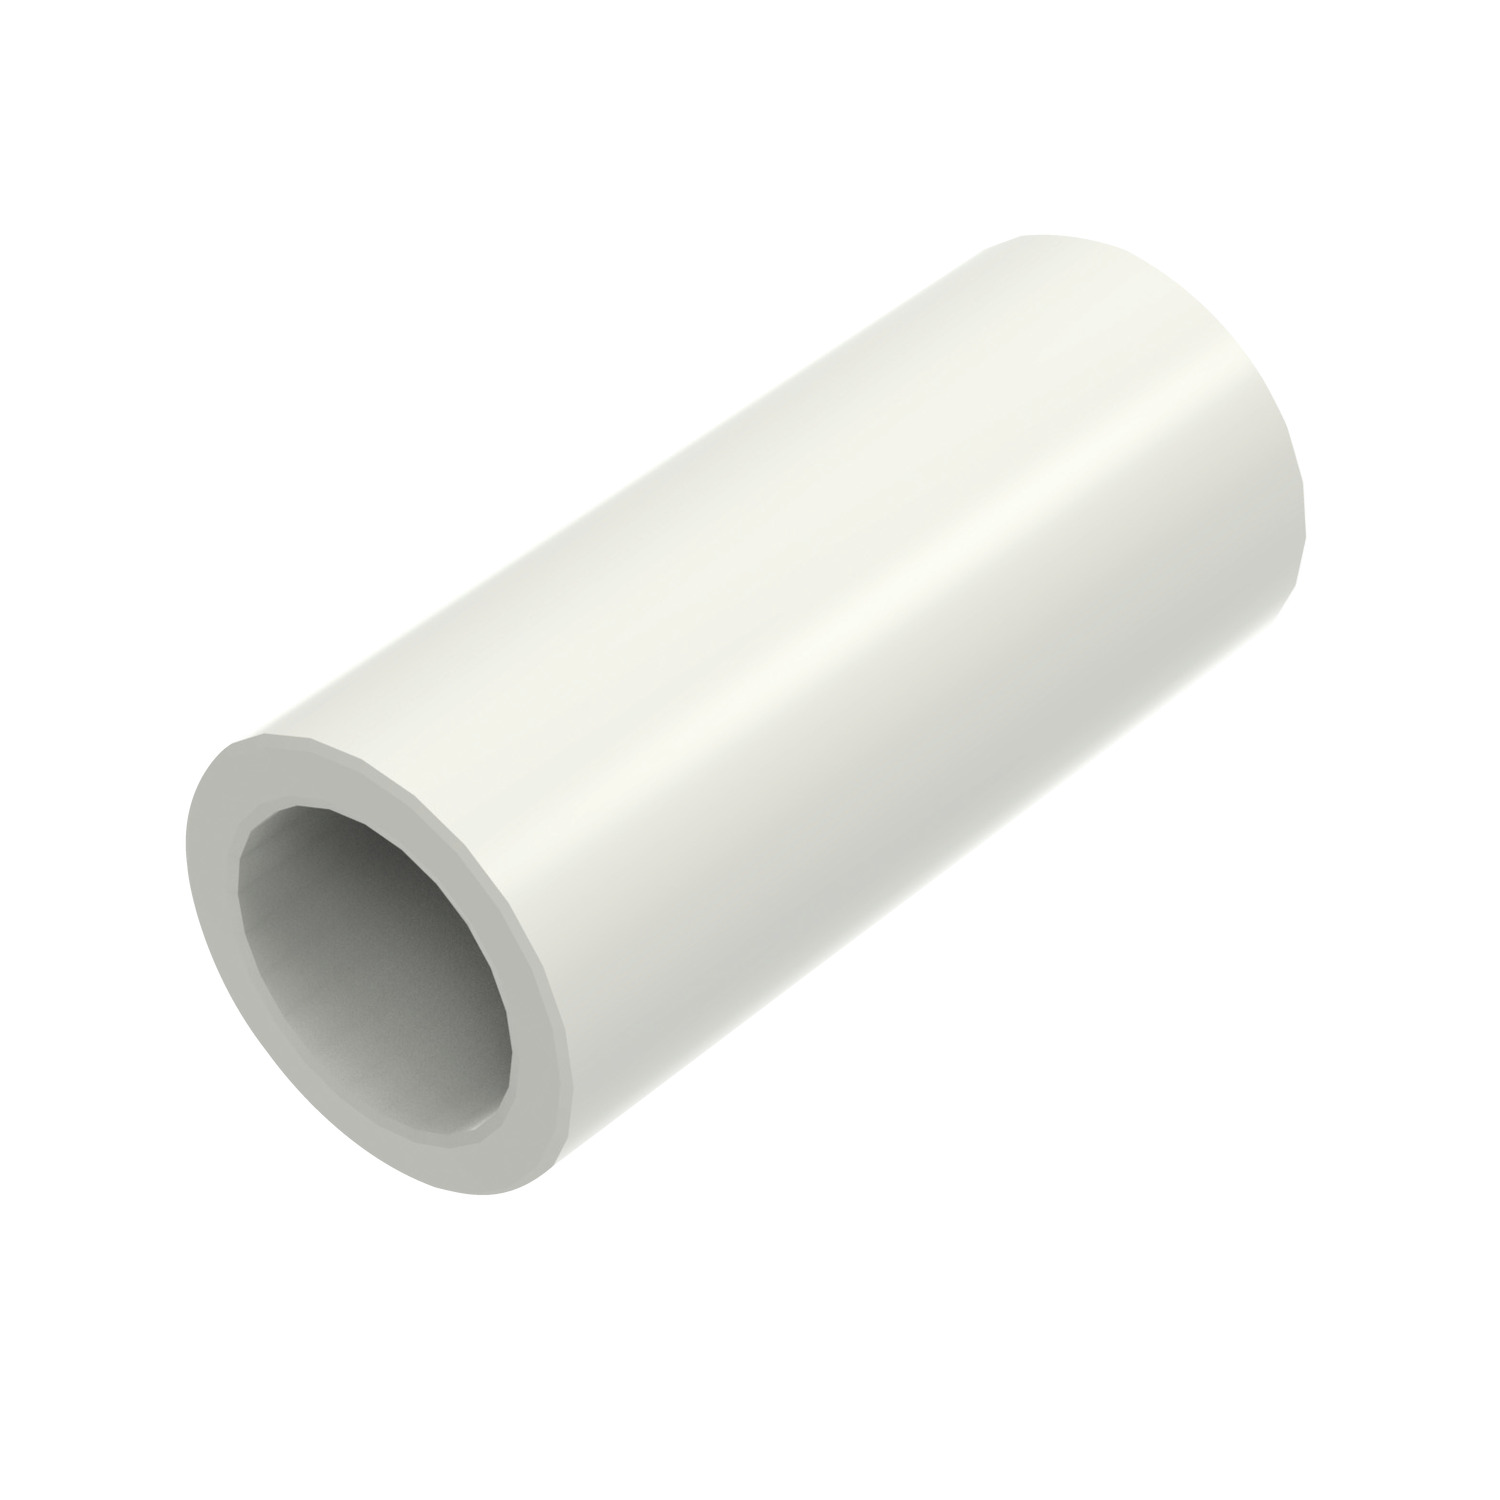 P1332 - Cylindrical Spacers - Nylon